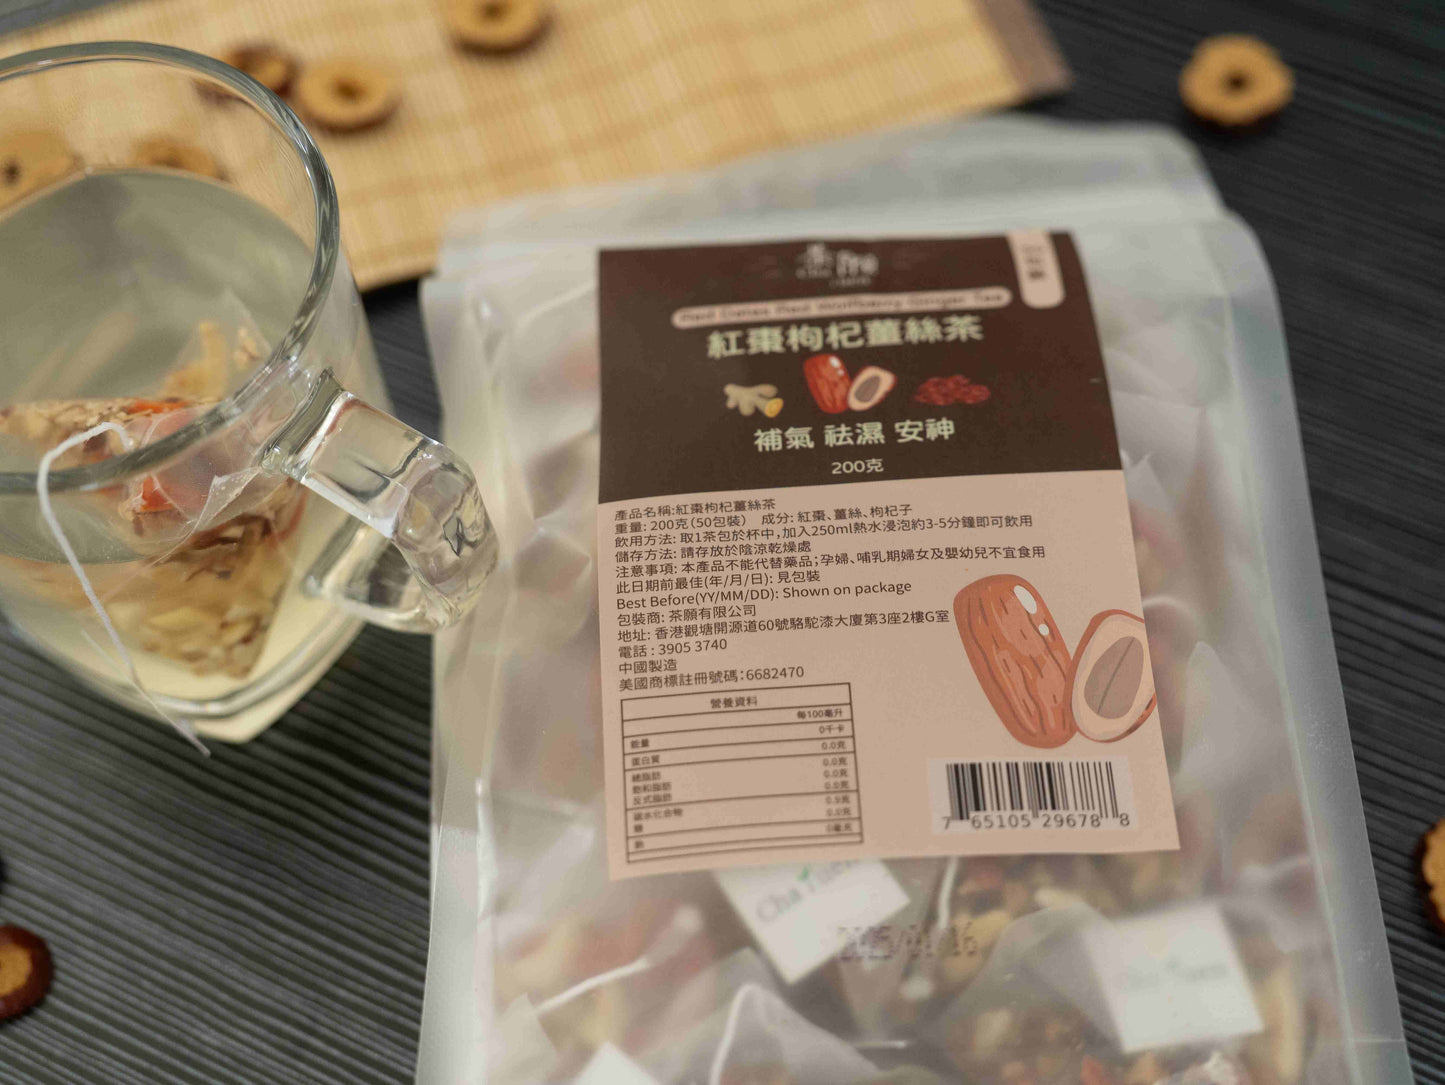 Cha Yuen – 50pcs Red Dates Red Wolfberry Ginger Tea Tea for promoting wellness and moisture balance